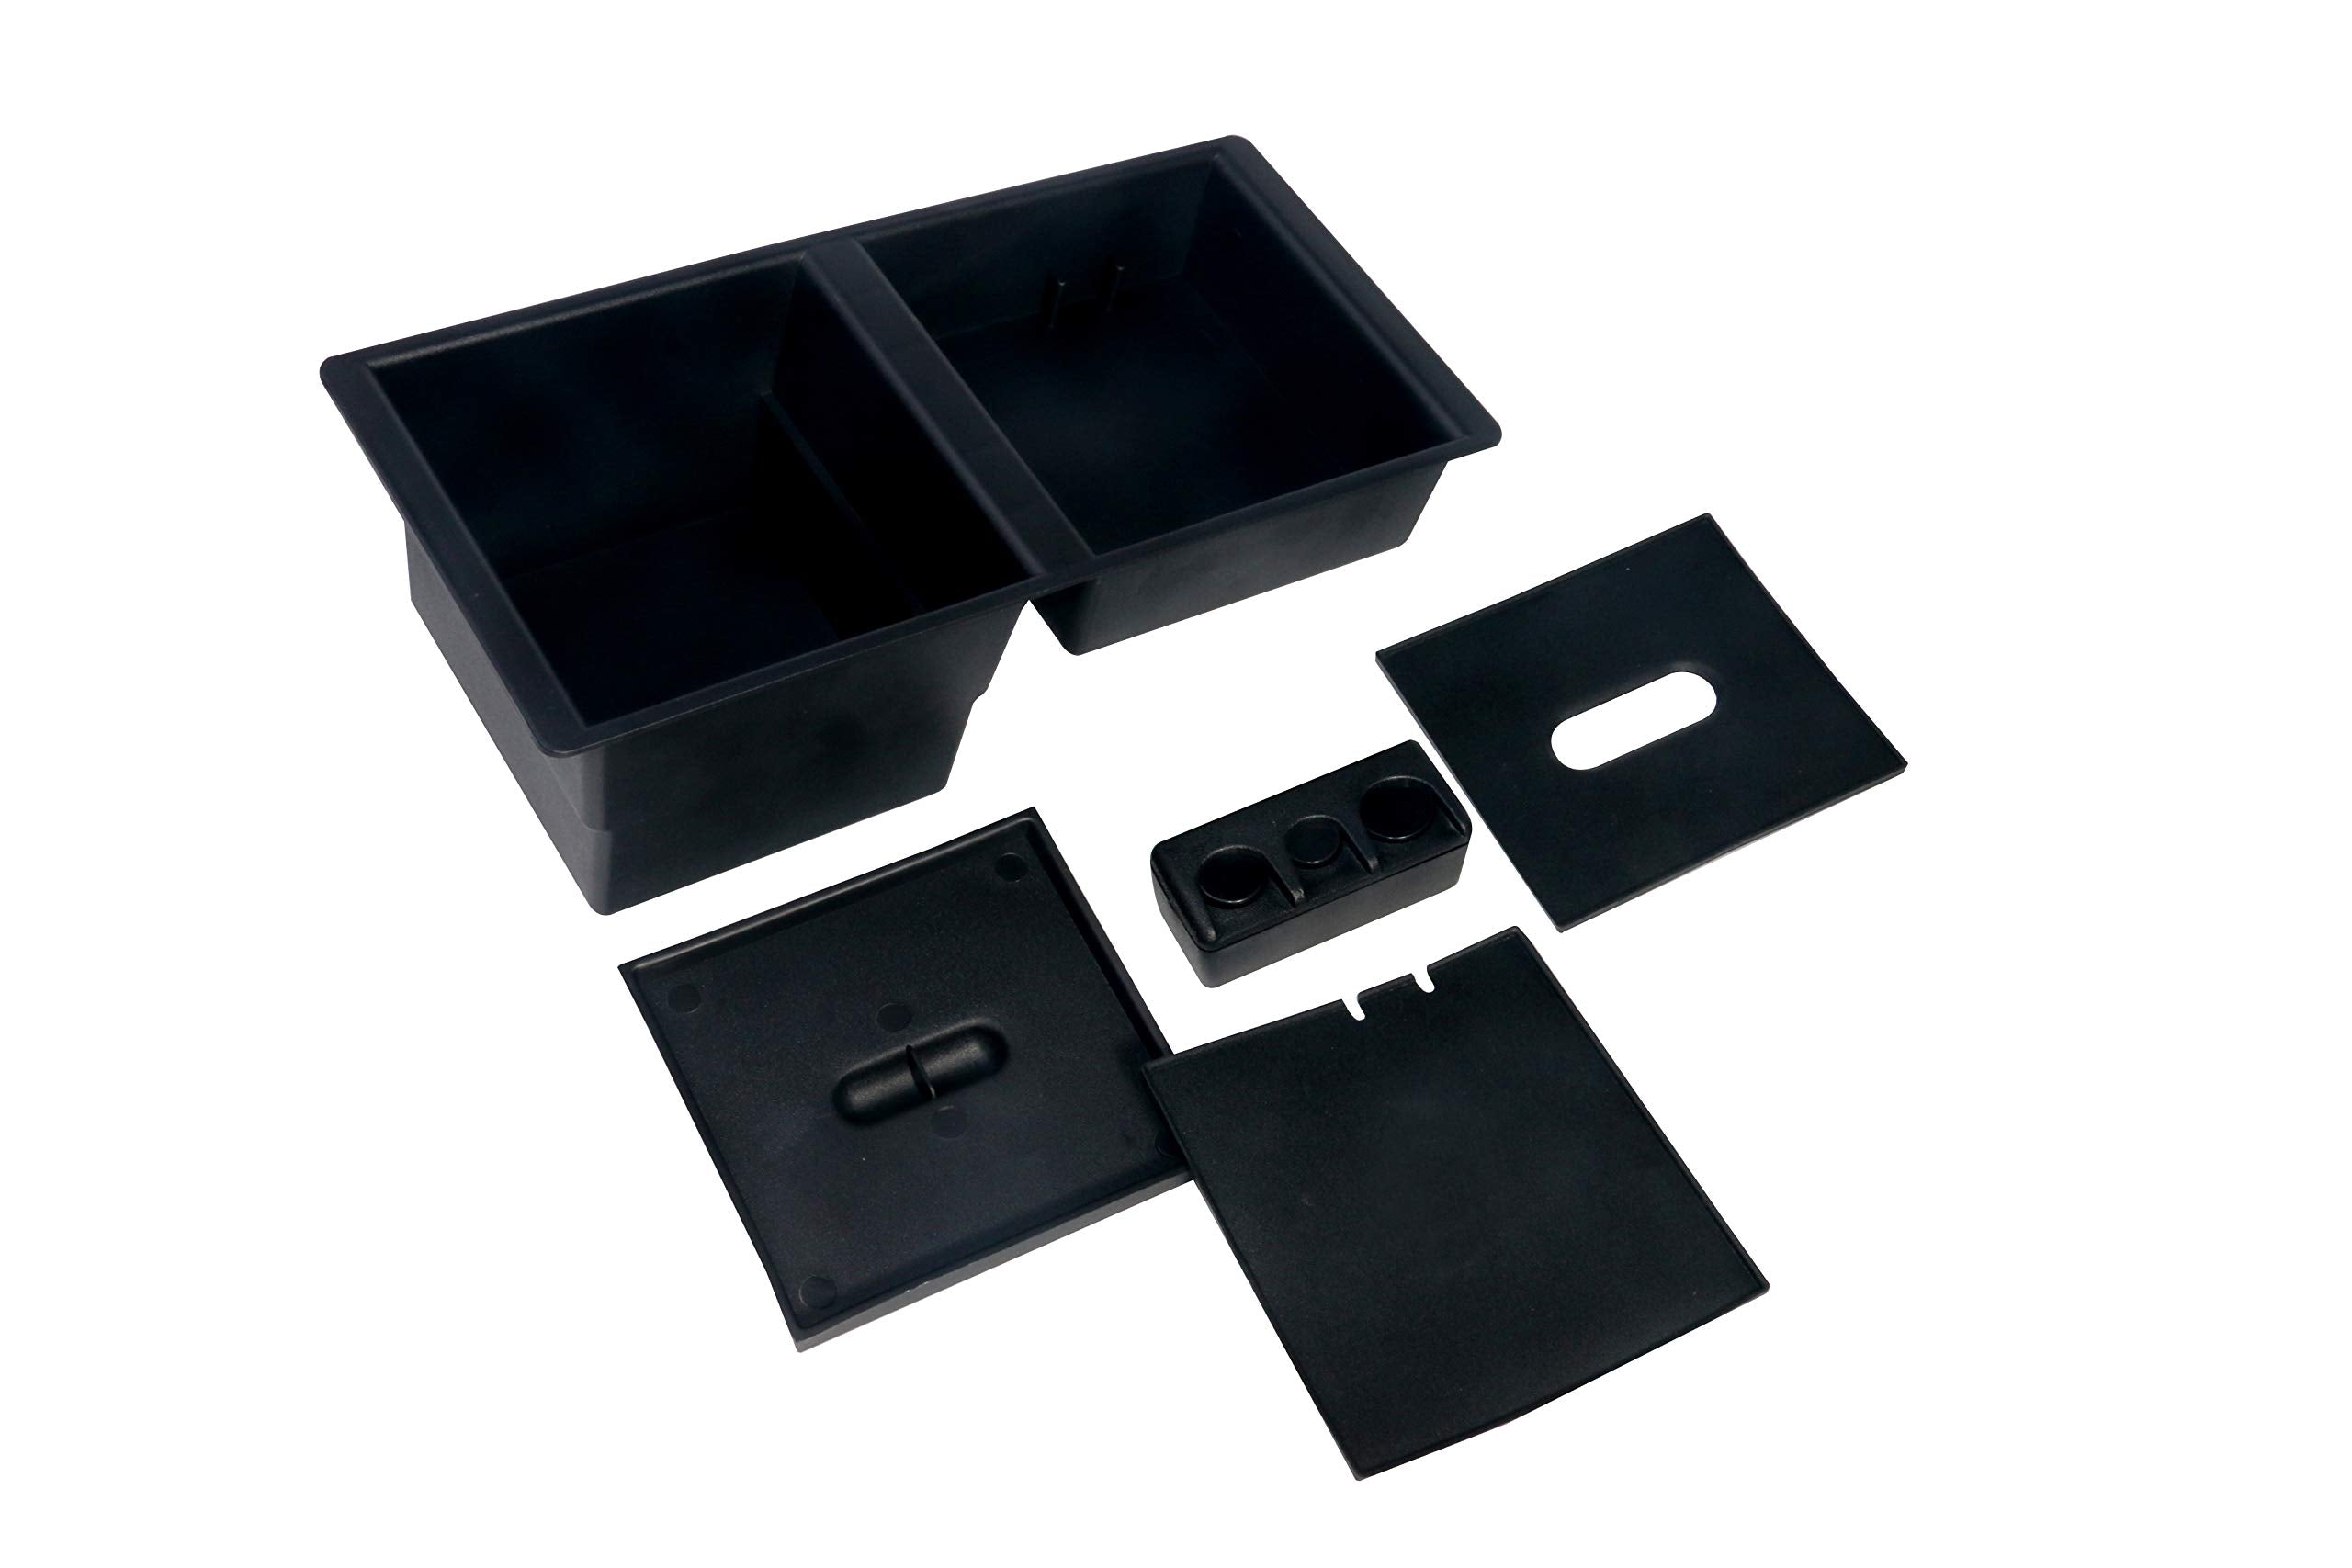 AA Ignition Center Console Organizer Tray - Replaces Part 22817343 - Compatible with Chevy, GMC Vehicles - 2014-2019 Silverado 1500, 2500 HD, Suburban, 3500 HD, Tahoe, Sierra, 2500, Yukon, XL  - Very Good